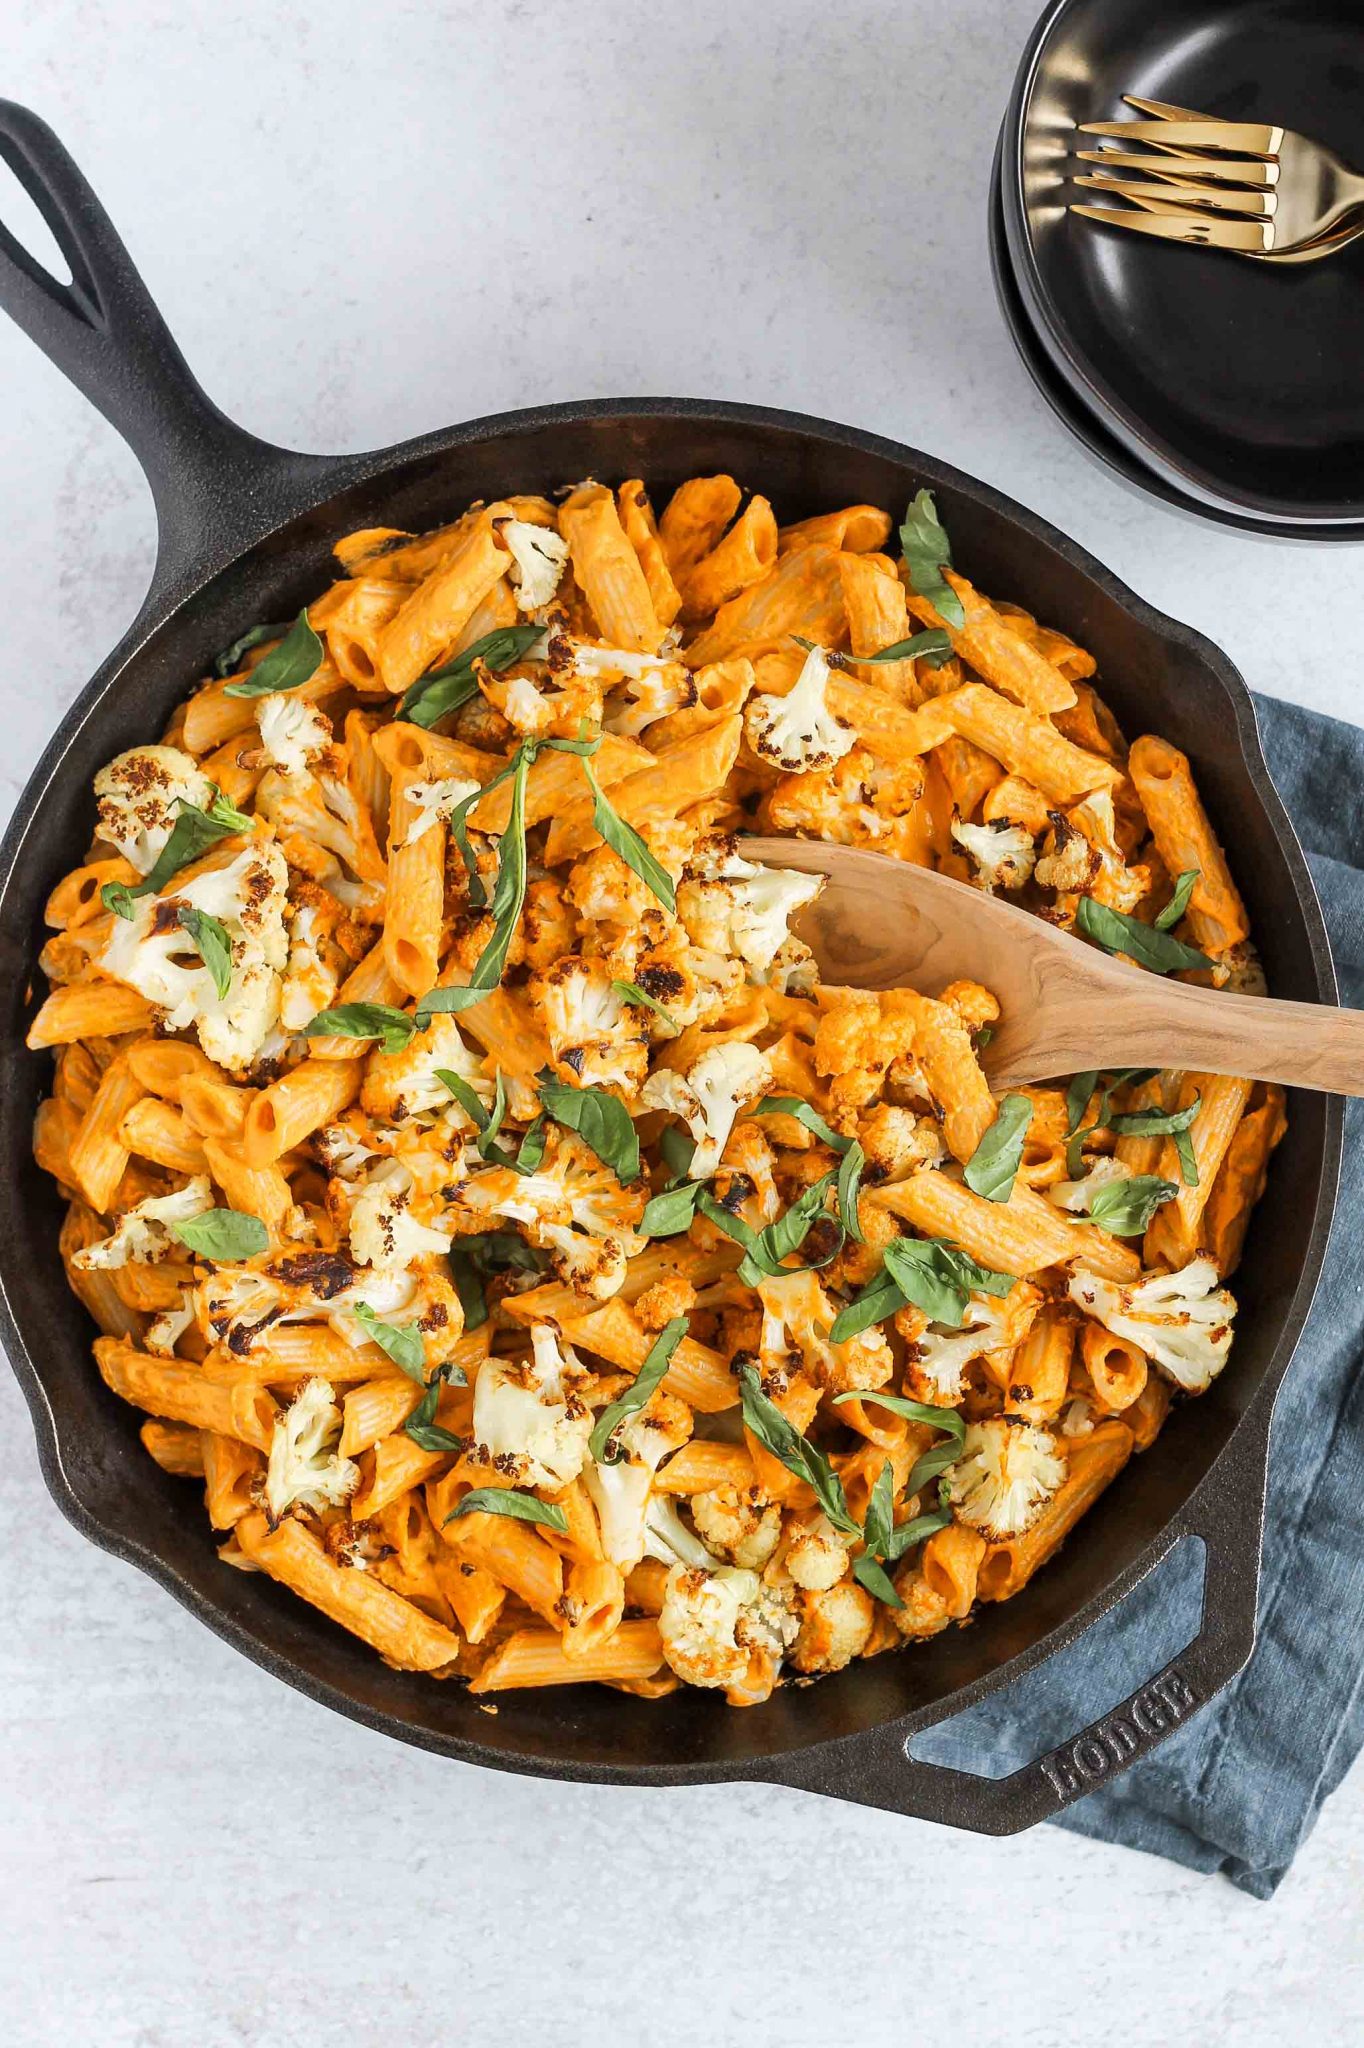 penne pasta tossed in roasted red peppers sauce androasted cauliflower